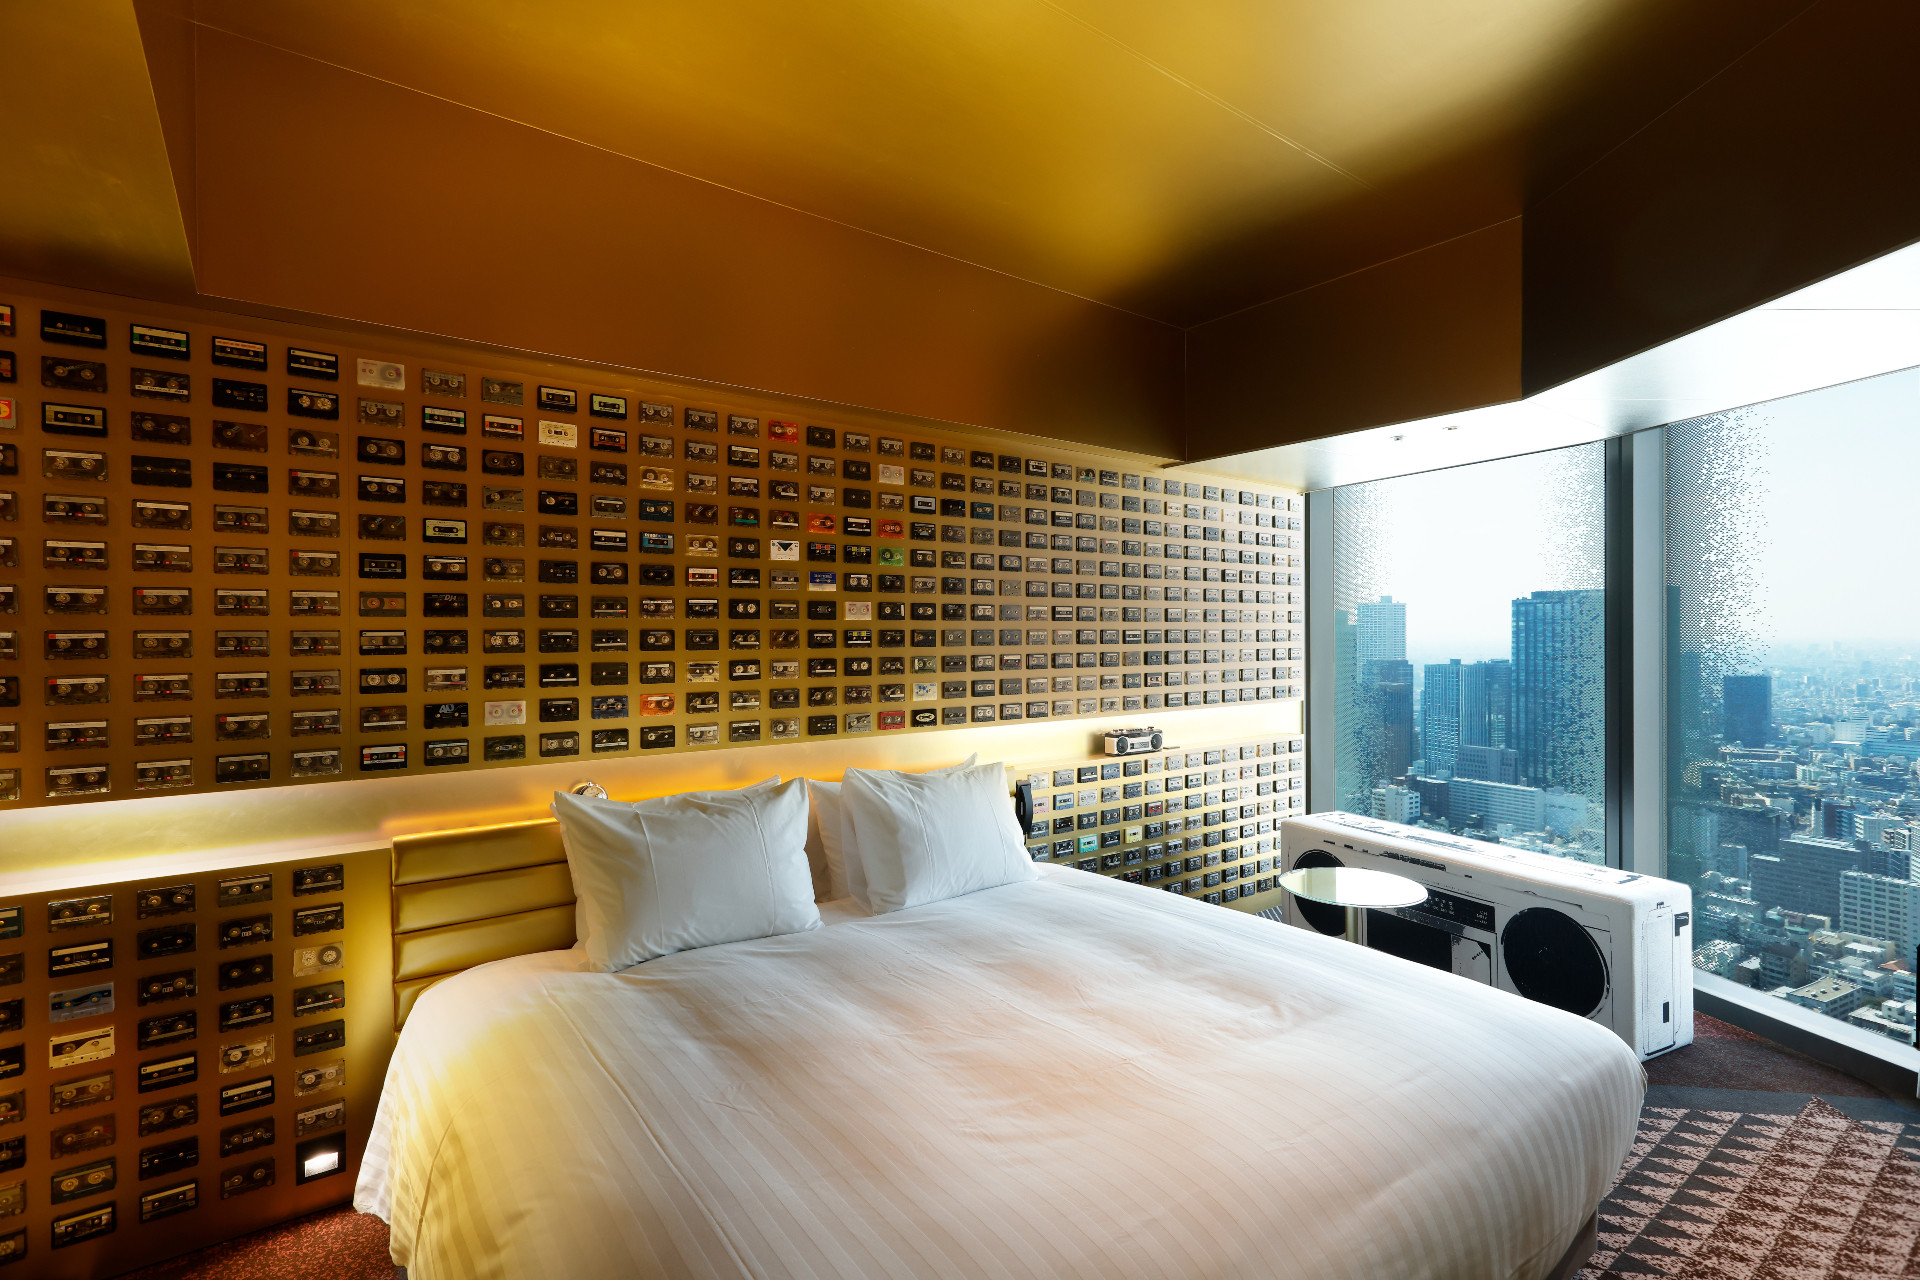 A music-themed room at Hotel Groove in Tokyo features cassette tapes on the wall. It was designed in collaboration with artist Yoshiaki Kaihatsu. Photo: Handout